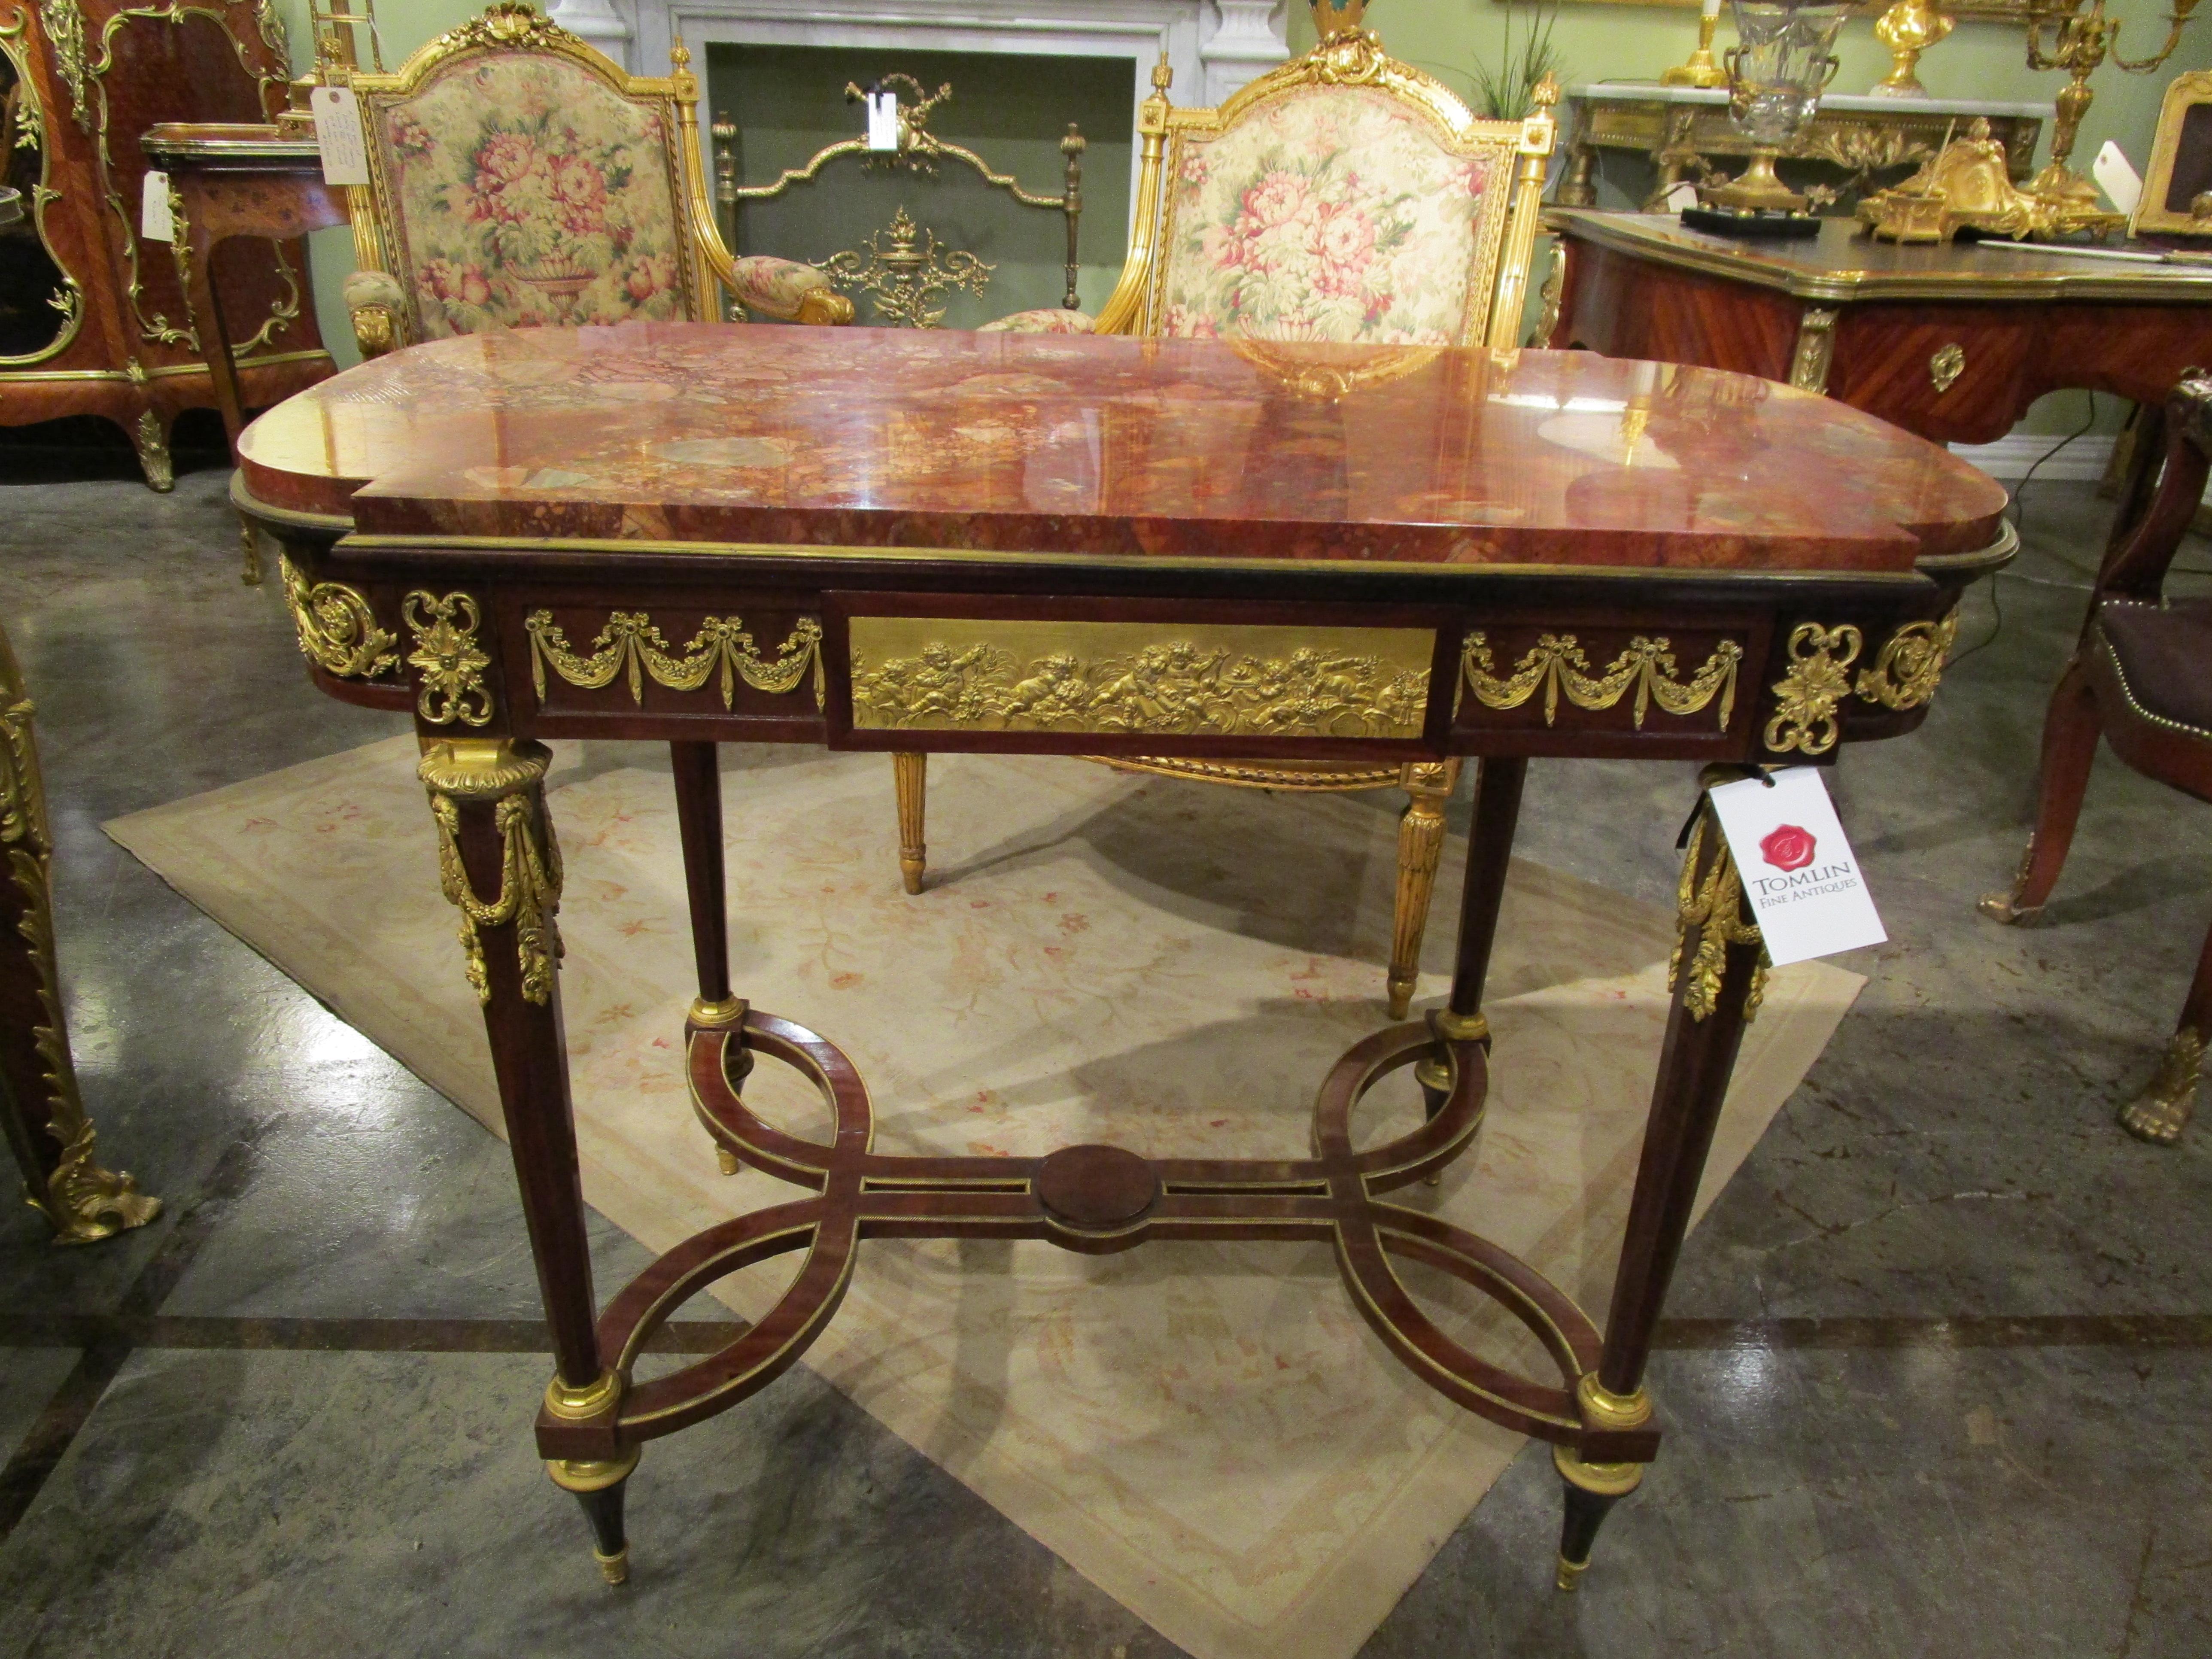 A fine 19th c French Louis XVI mahogany and gilt bronze mounted centertable 5